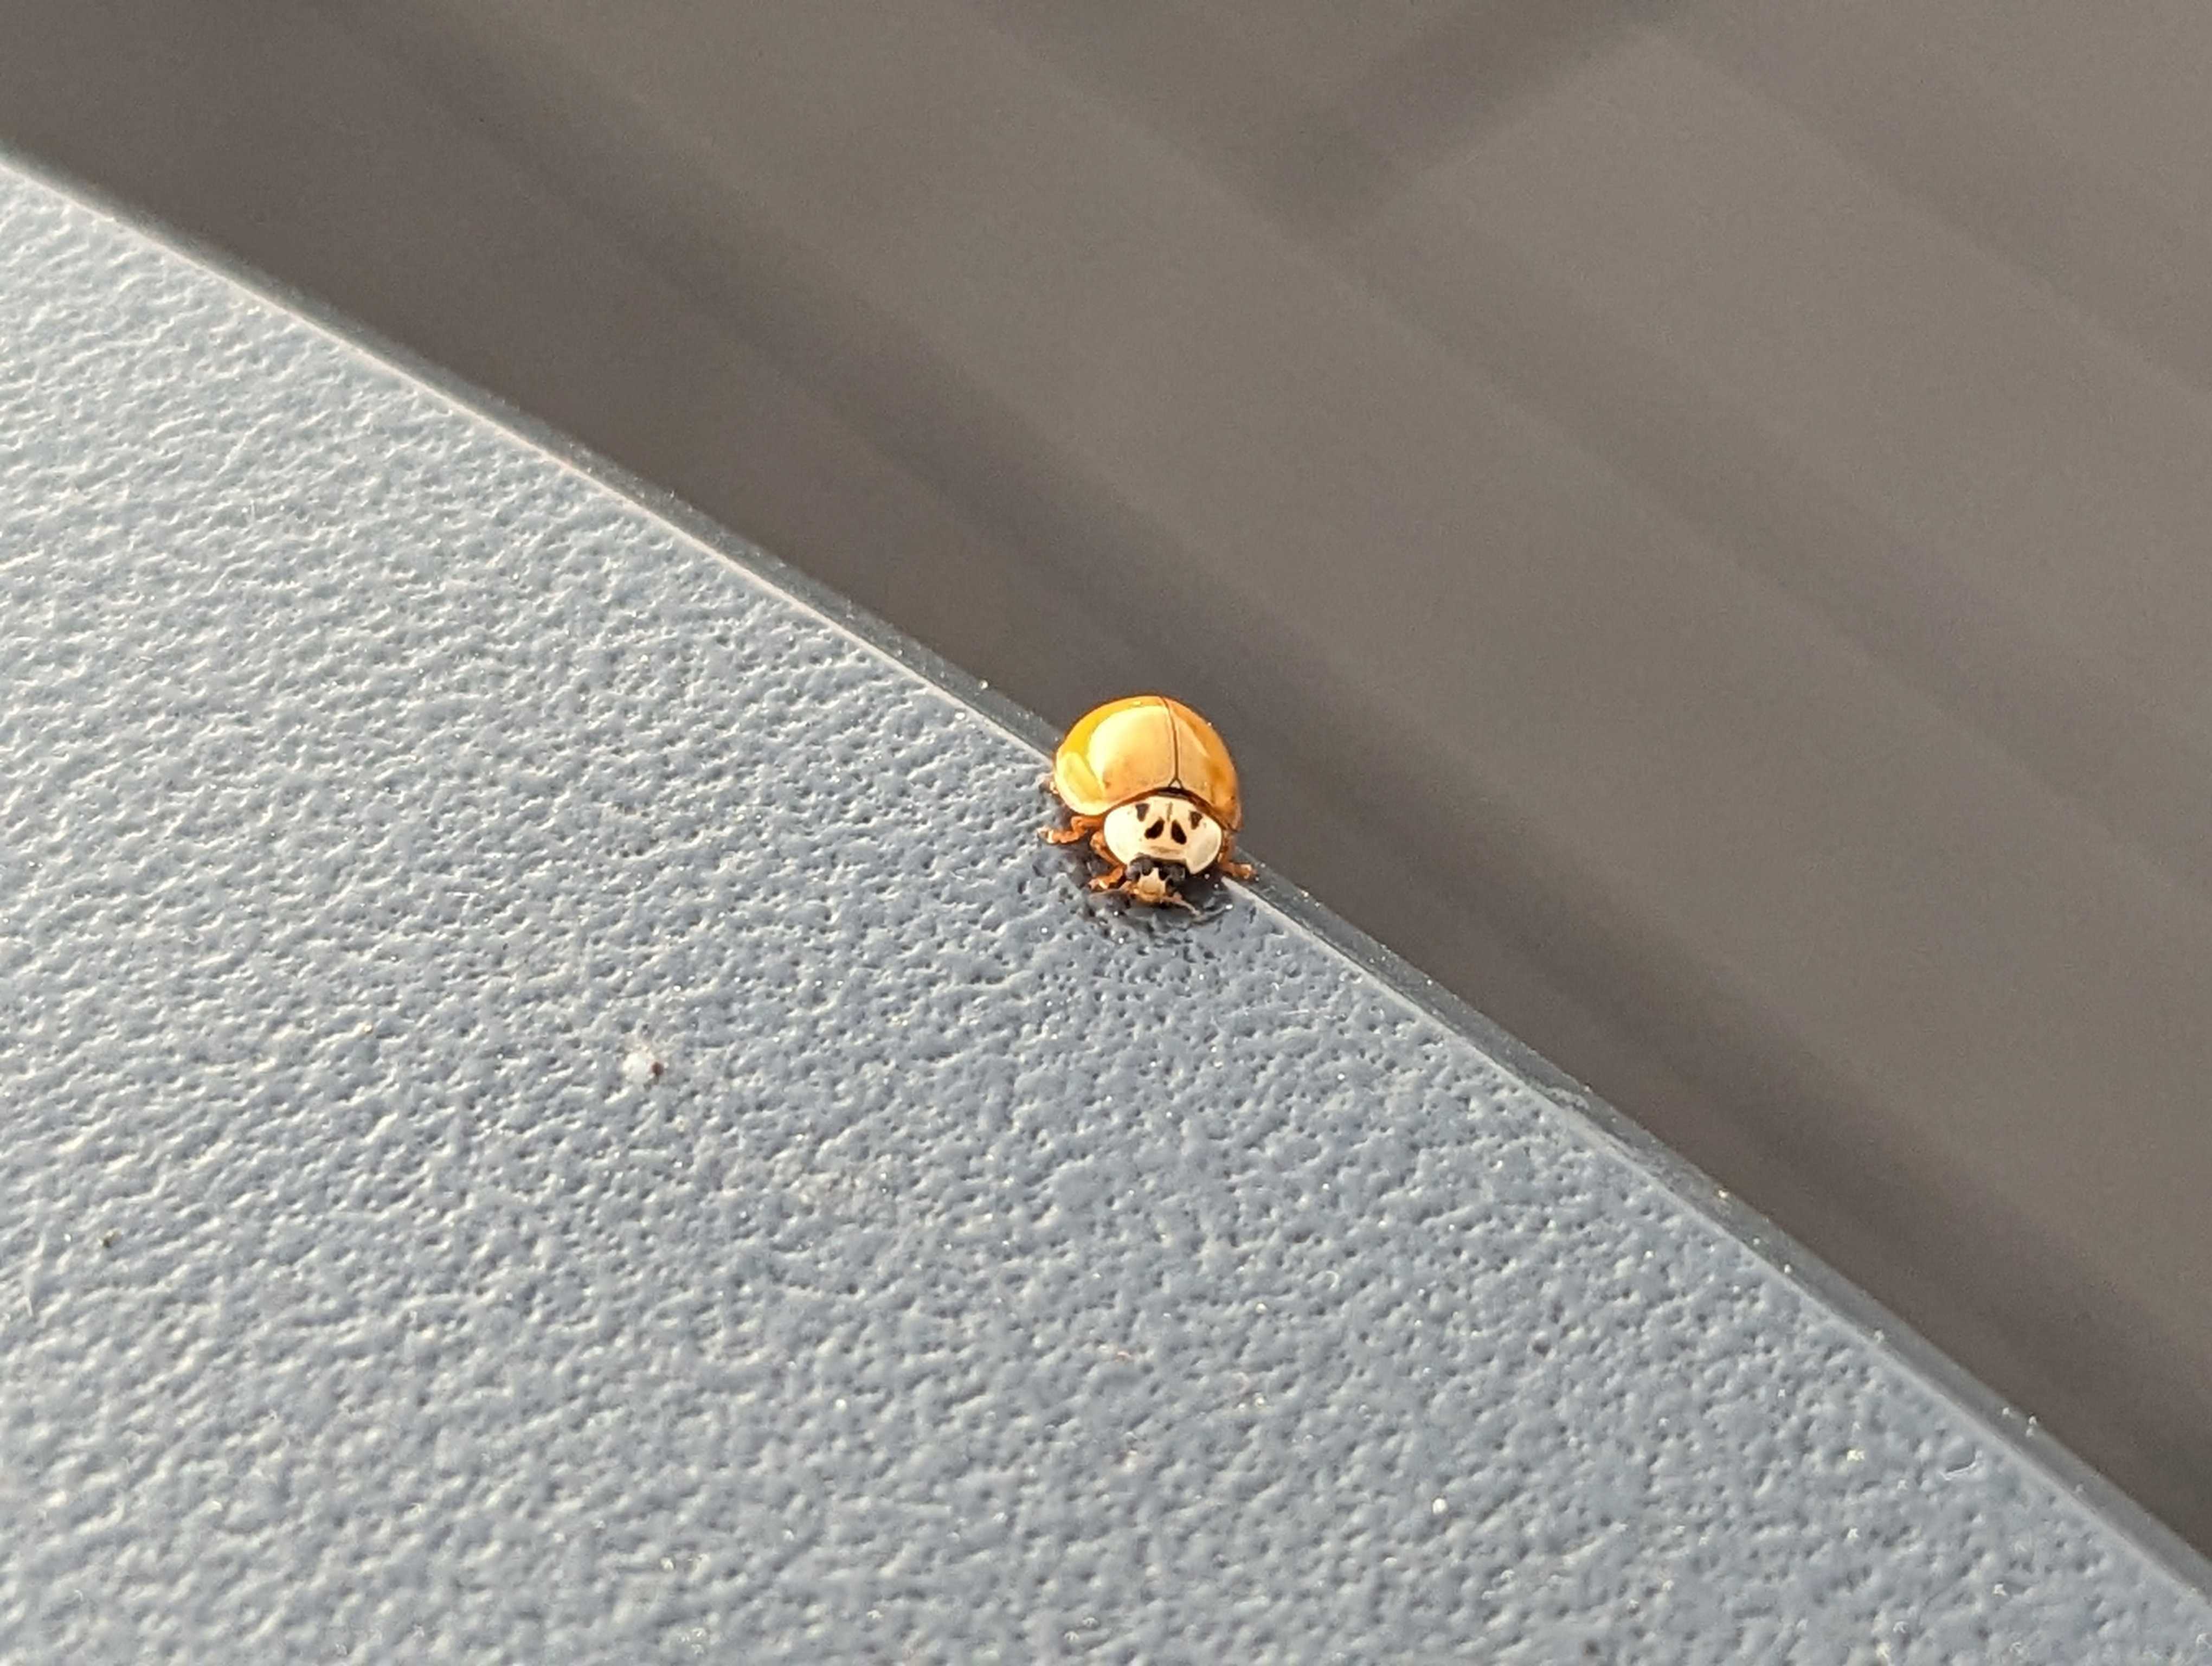 2x zoom of a ladybug on a table